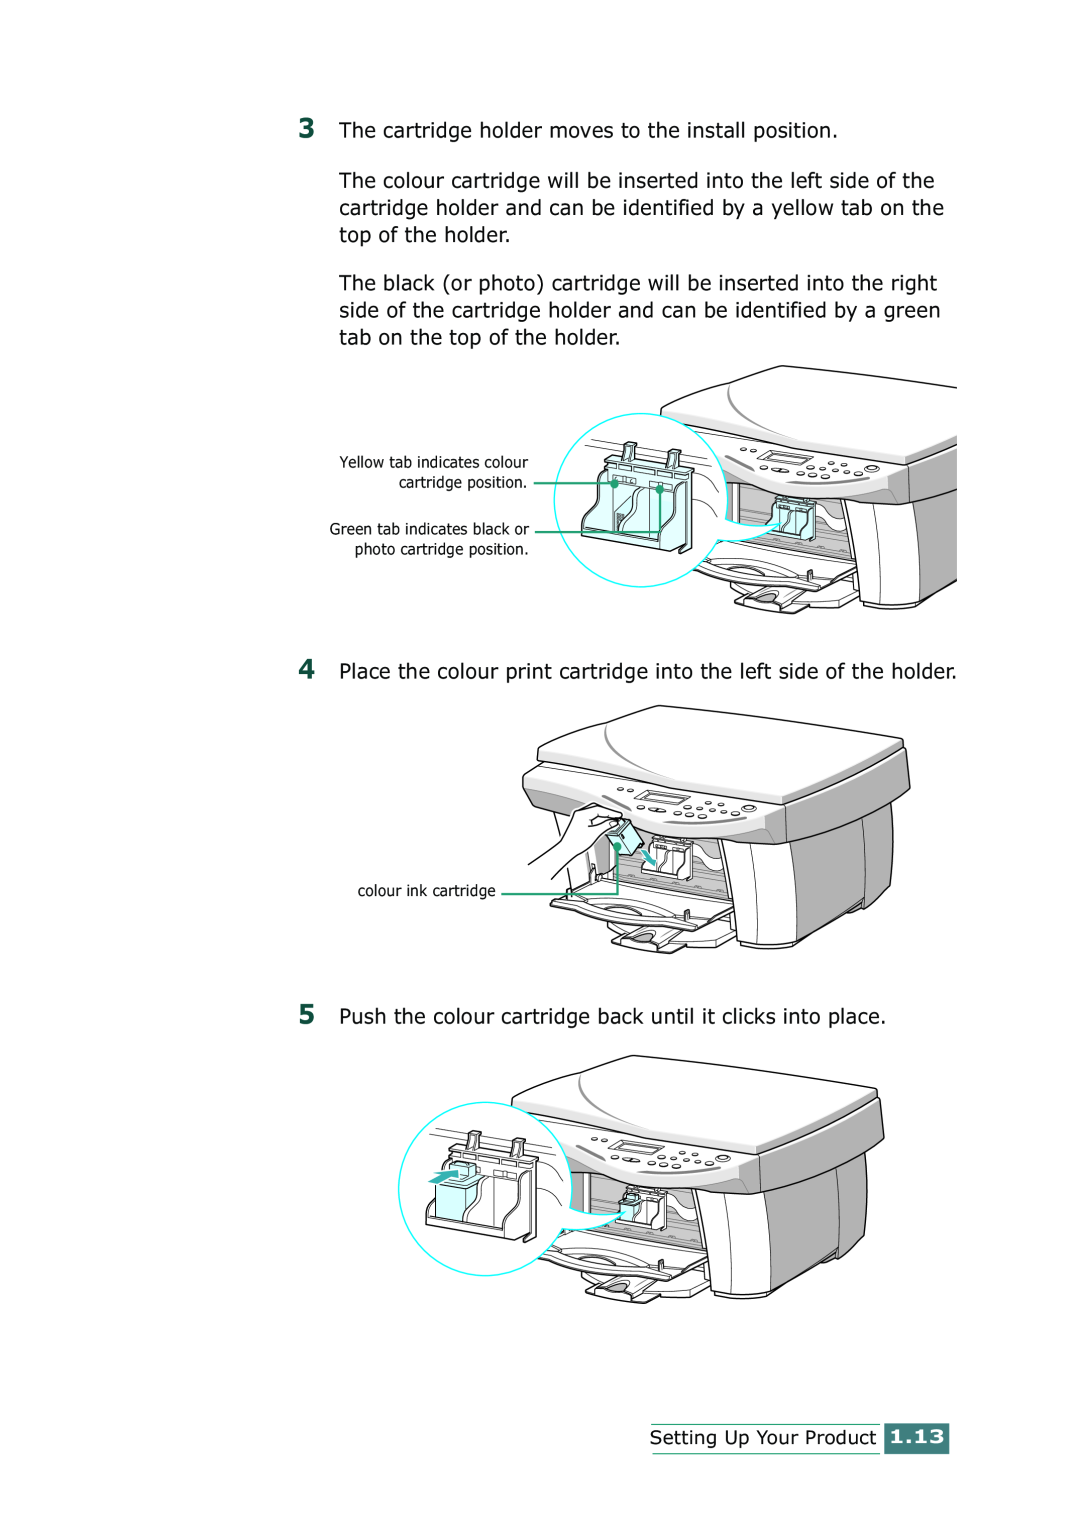 Samsung SCX-1100 manual The cartridge holder moves to the install position 